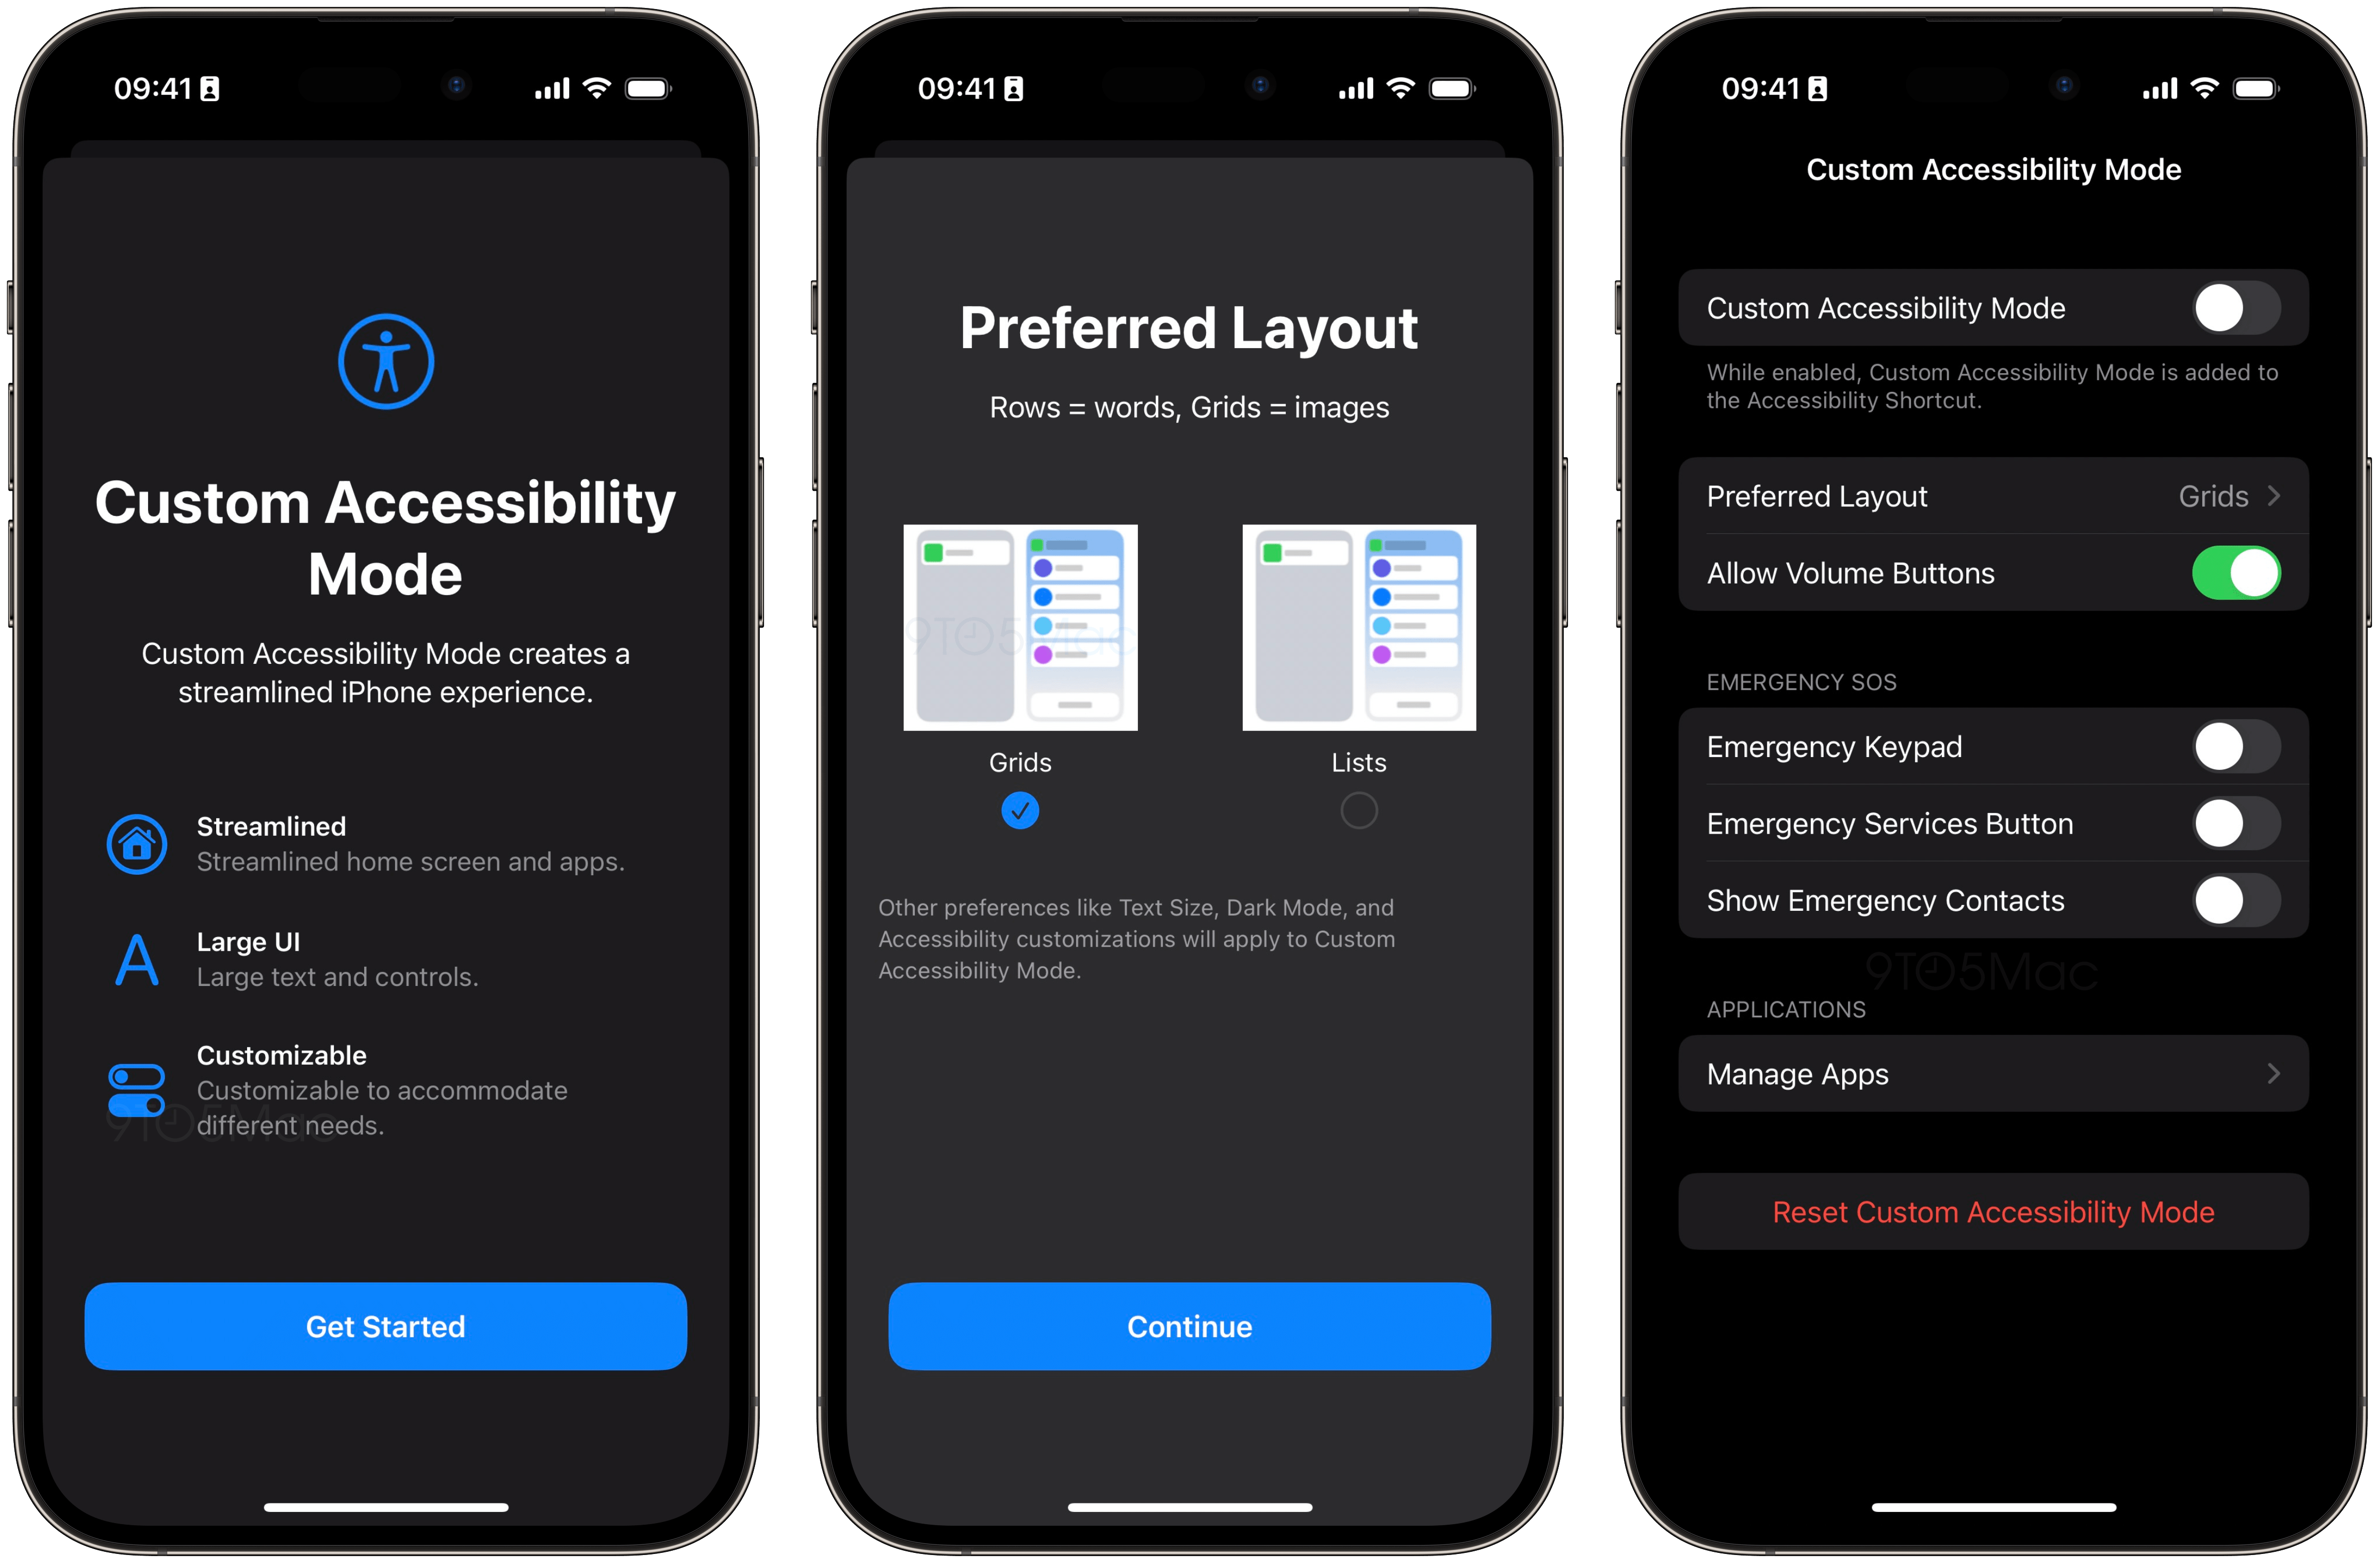 iOS 16.2 Custom Accessibility Mode with optimized experience for iPhone and iPad